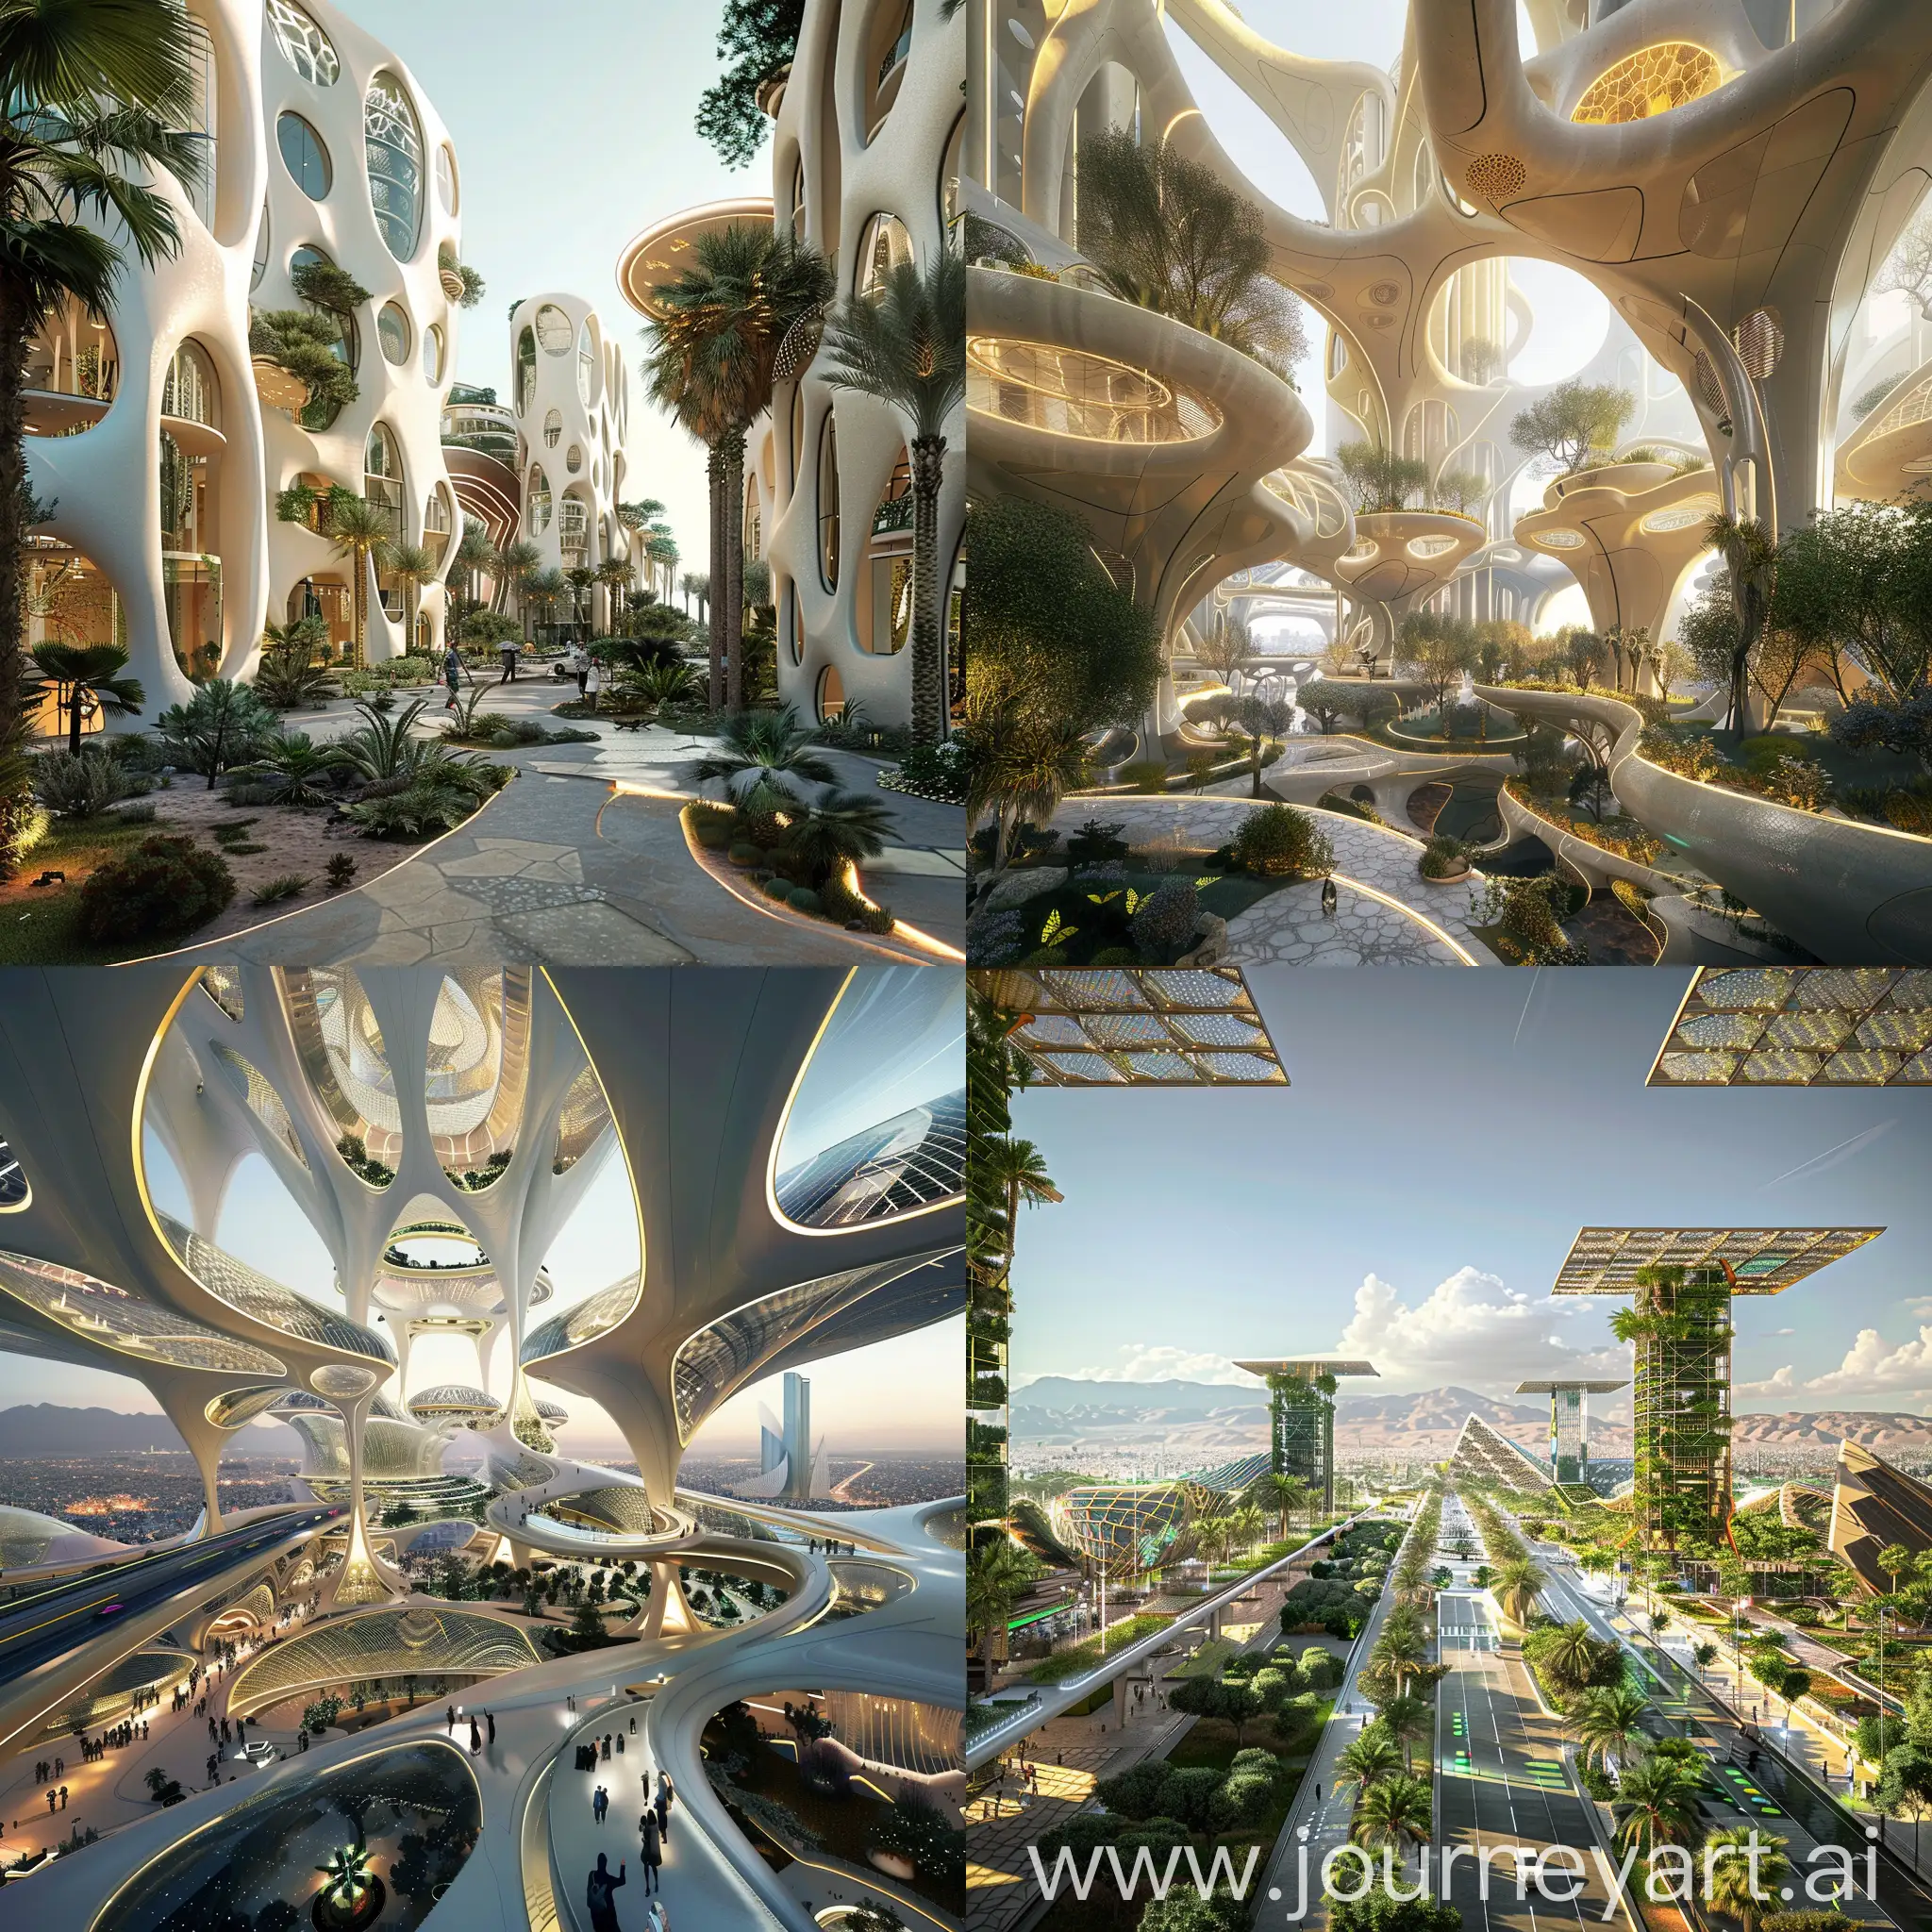 Futuristic-Cityscape-with-Kinetic-Facades-and-Vertical-Gardens